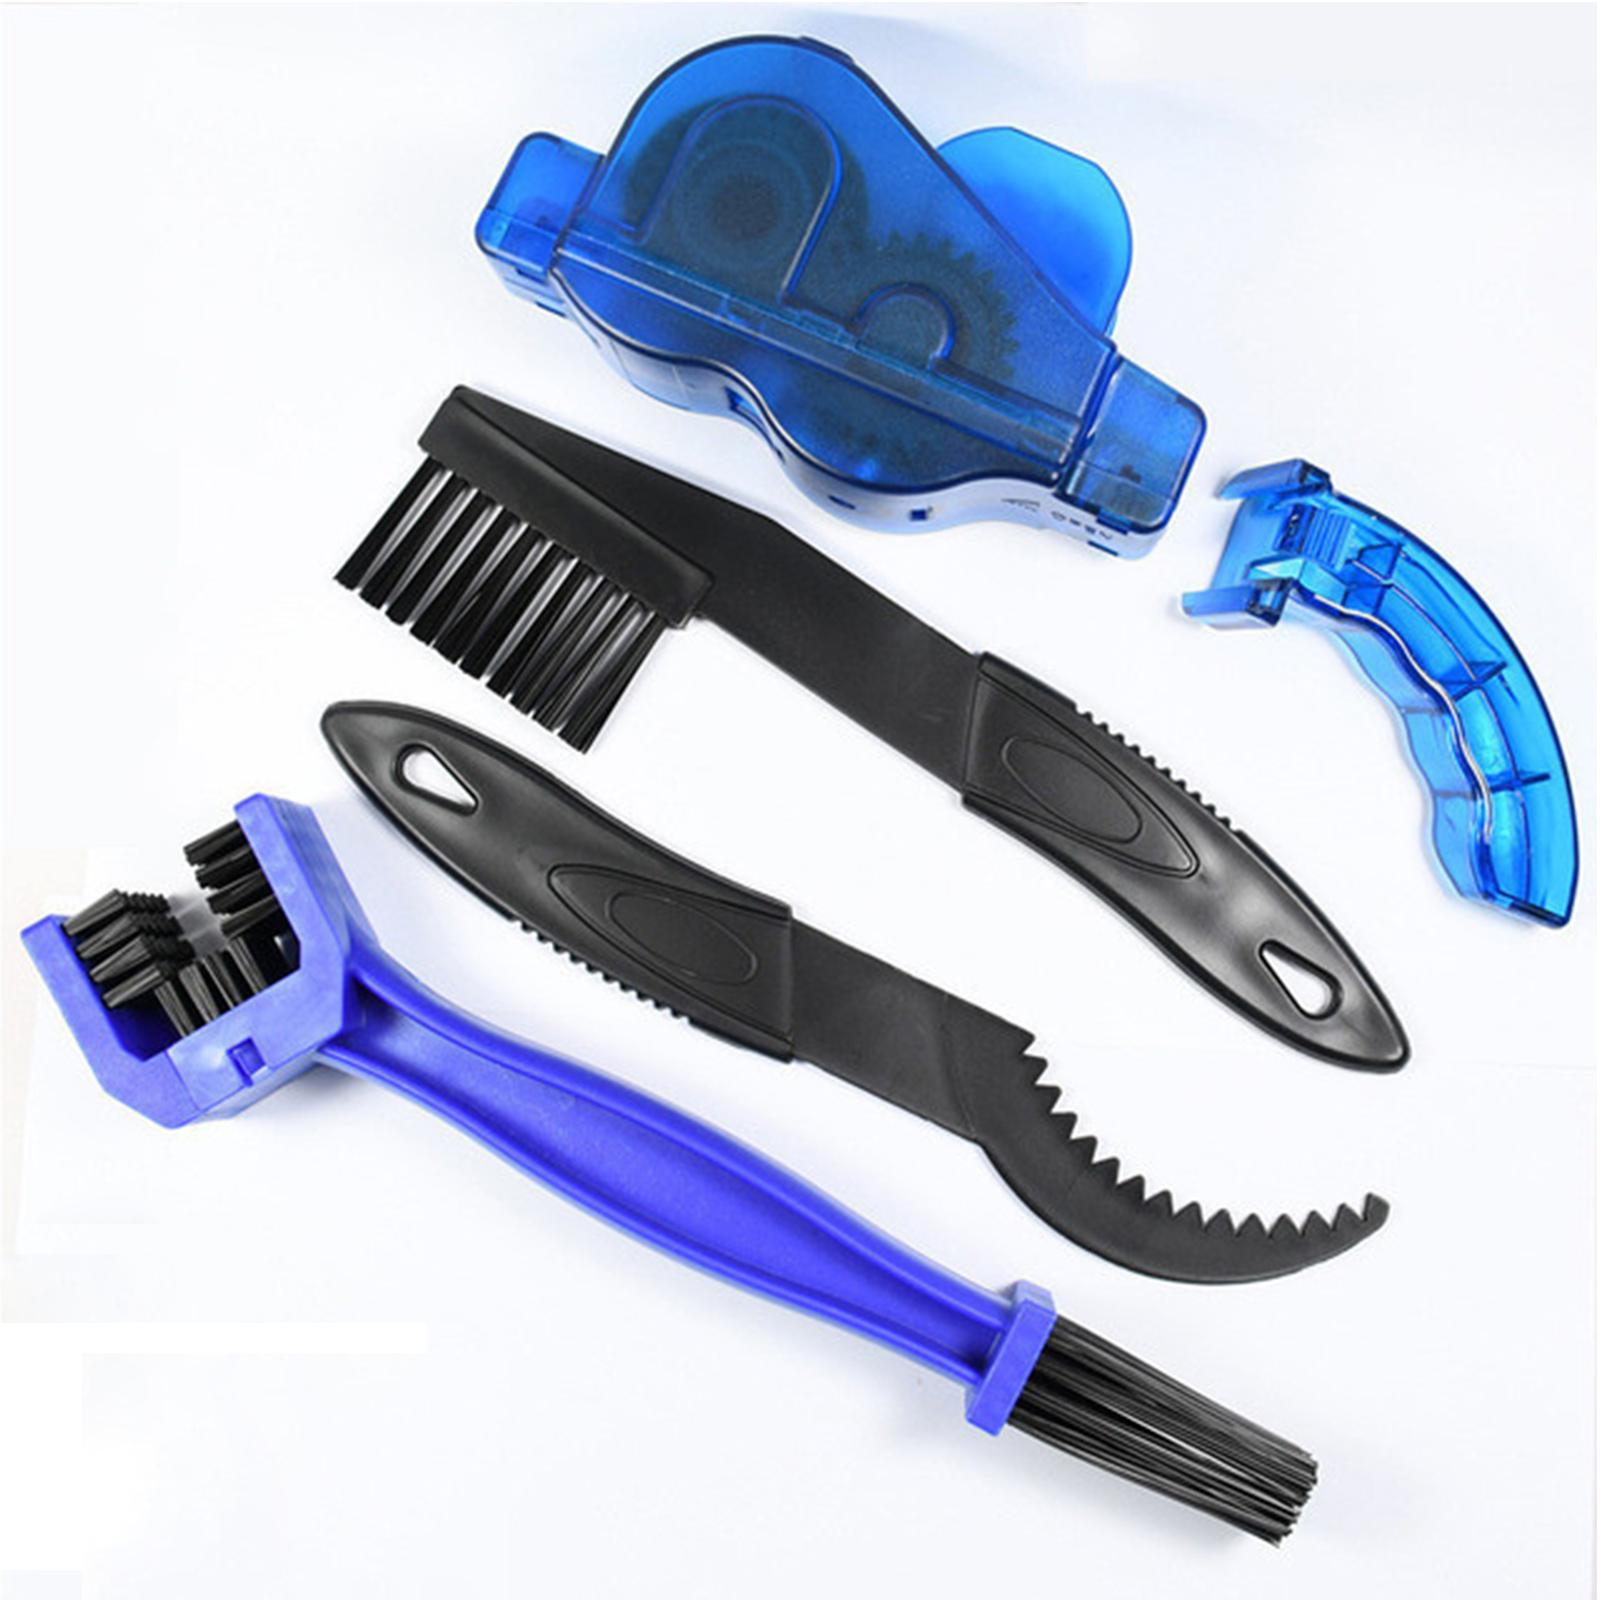 Bike Chain Cleaner Kit Bicycle Outdoor Cleaning Tool Accessories 7 Pieces